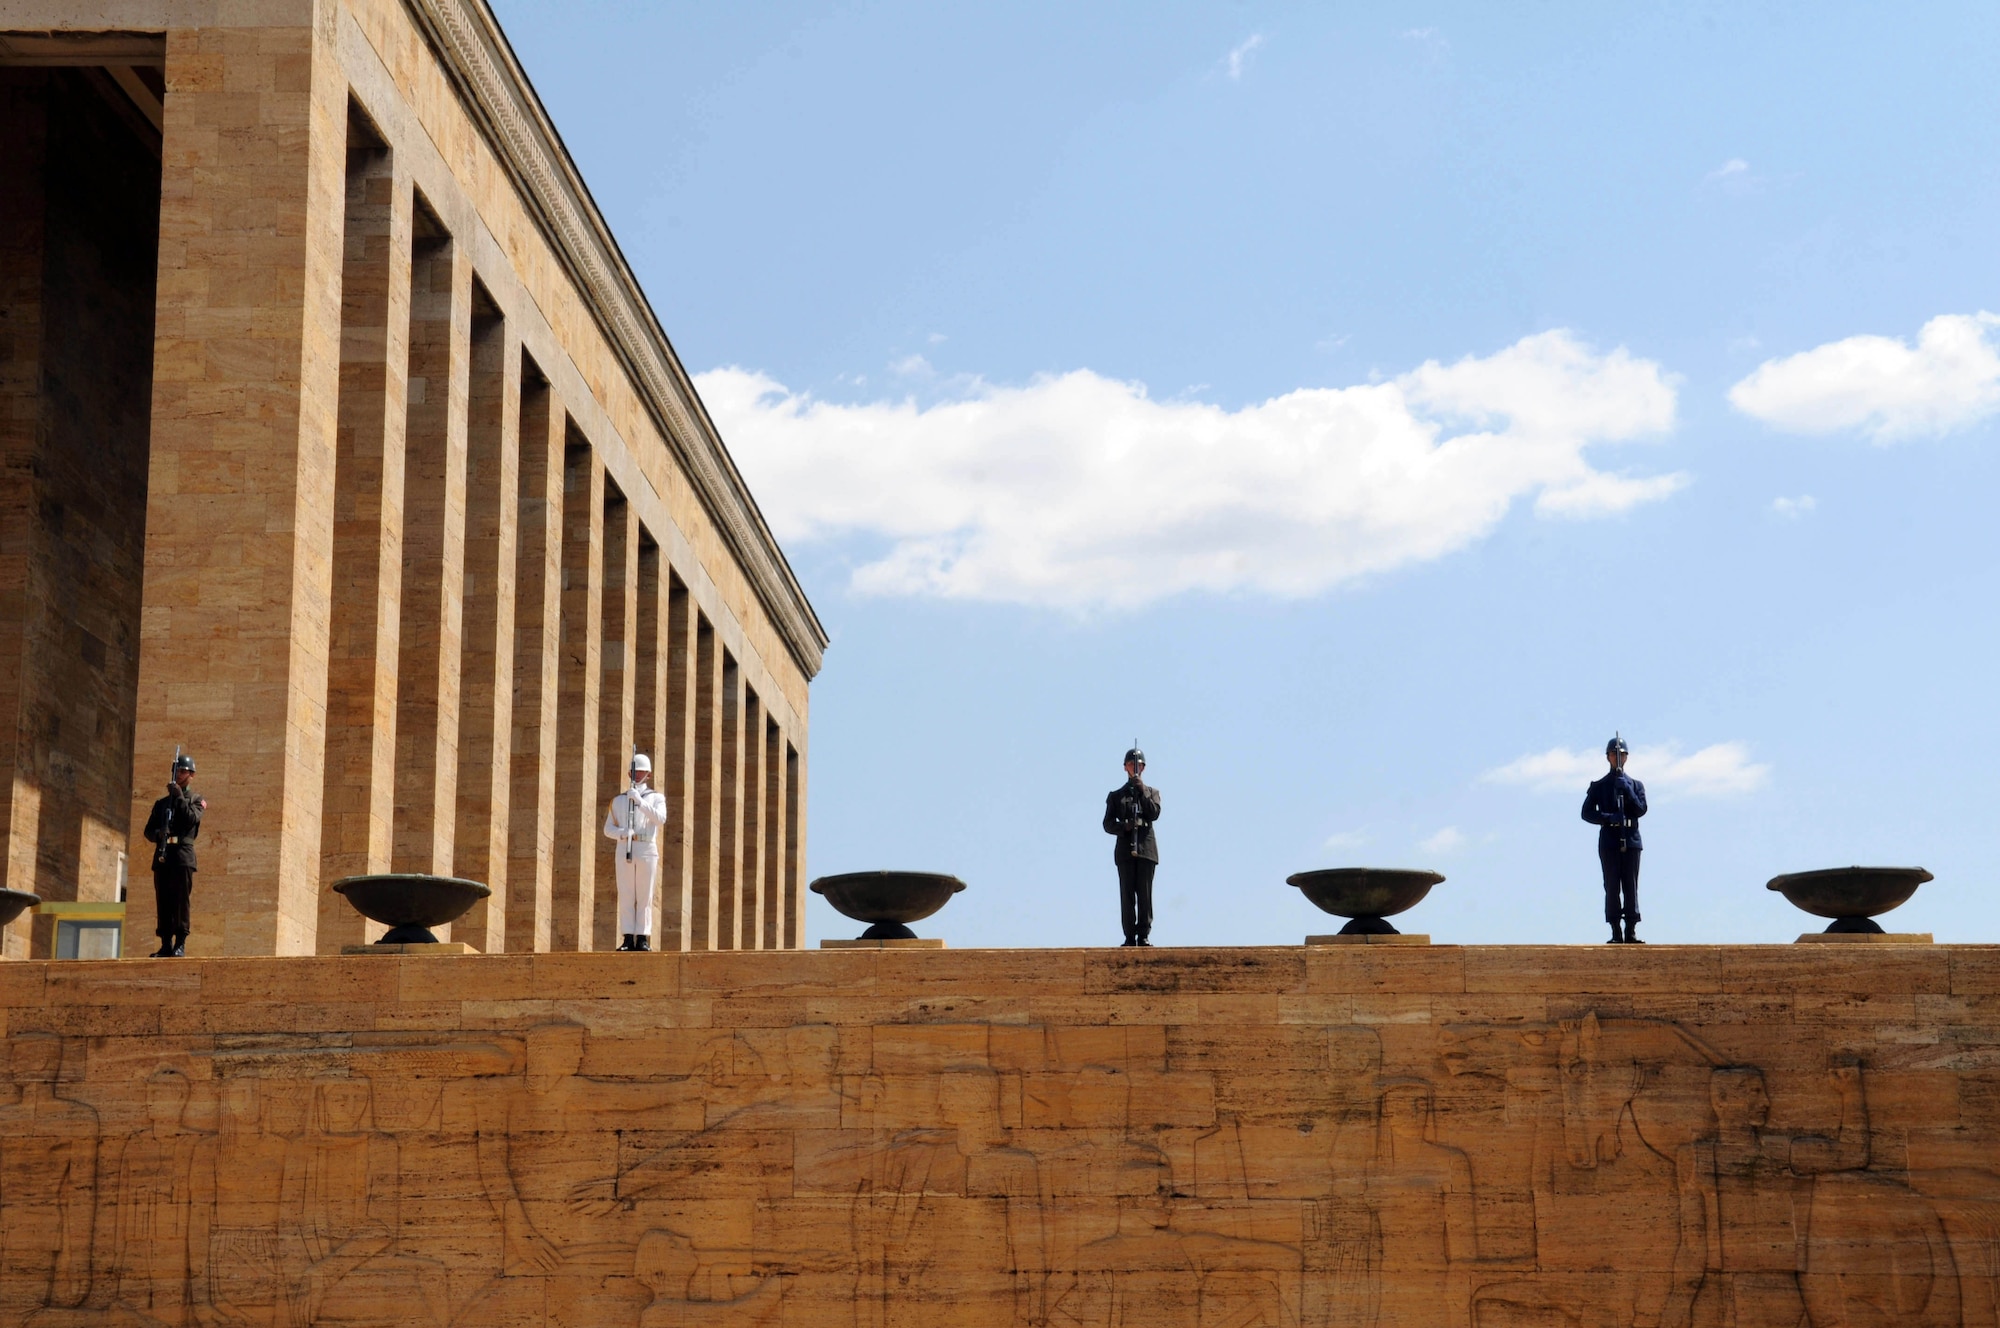 Turkish servicemembers stand guard and overlook Anitkabir, a memorial and mausoleum in Ankara, Turkey, honoring Mustafa Kemal Ataturk, the founder of the Republic of Turkey.  During a visit to the memorial July 19, 2010, Air Force Chief of Staff Gen. Norton Schwartz and his wife Suzie participated in a wreath-laying ceremony along with Airmen stationed in Ankara. The ceremony was the first event during General Schwartz's multi-day visit to Turkey. (U.S. Air Force photo/Senior Airman Ashley Wood)